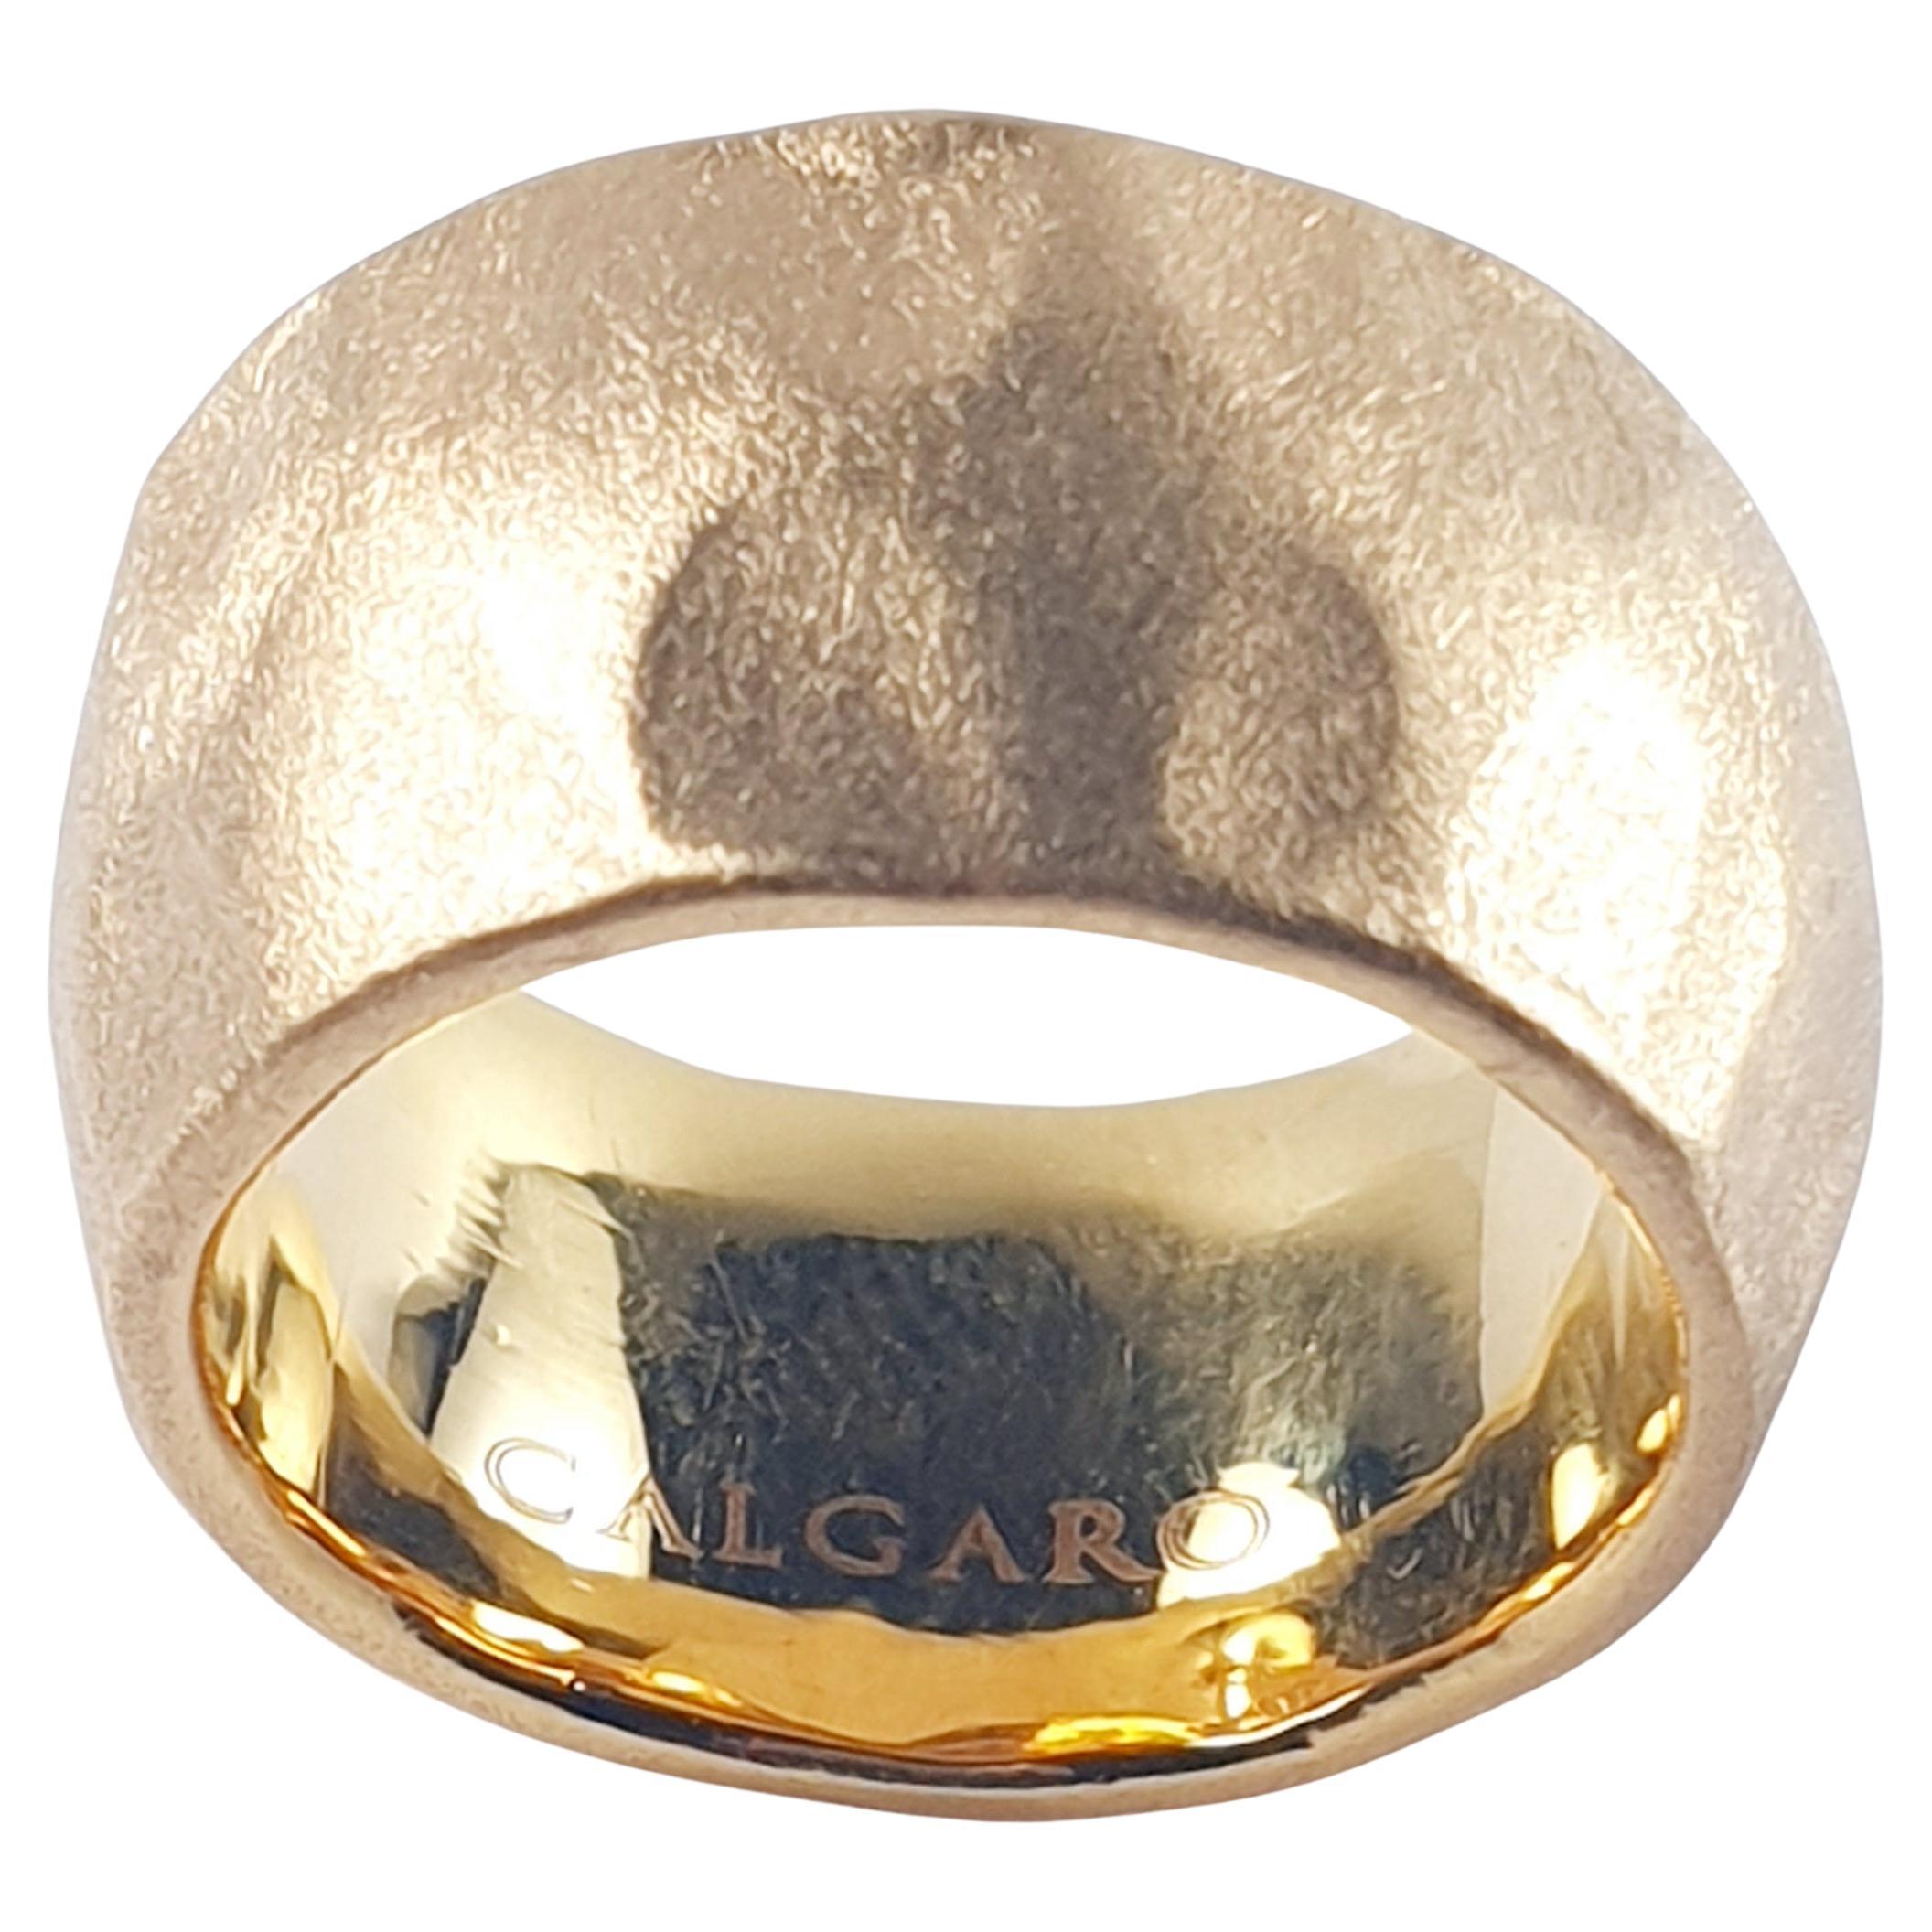 Calgaro 18 Karat Satined Rose Gold Ring with Martelé Texture For Sale